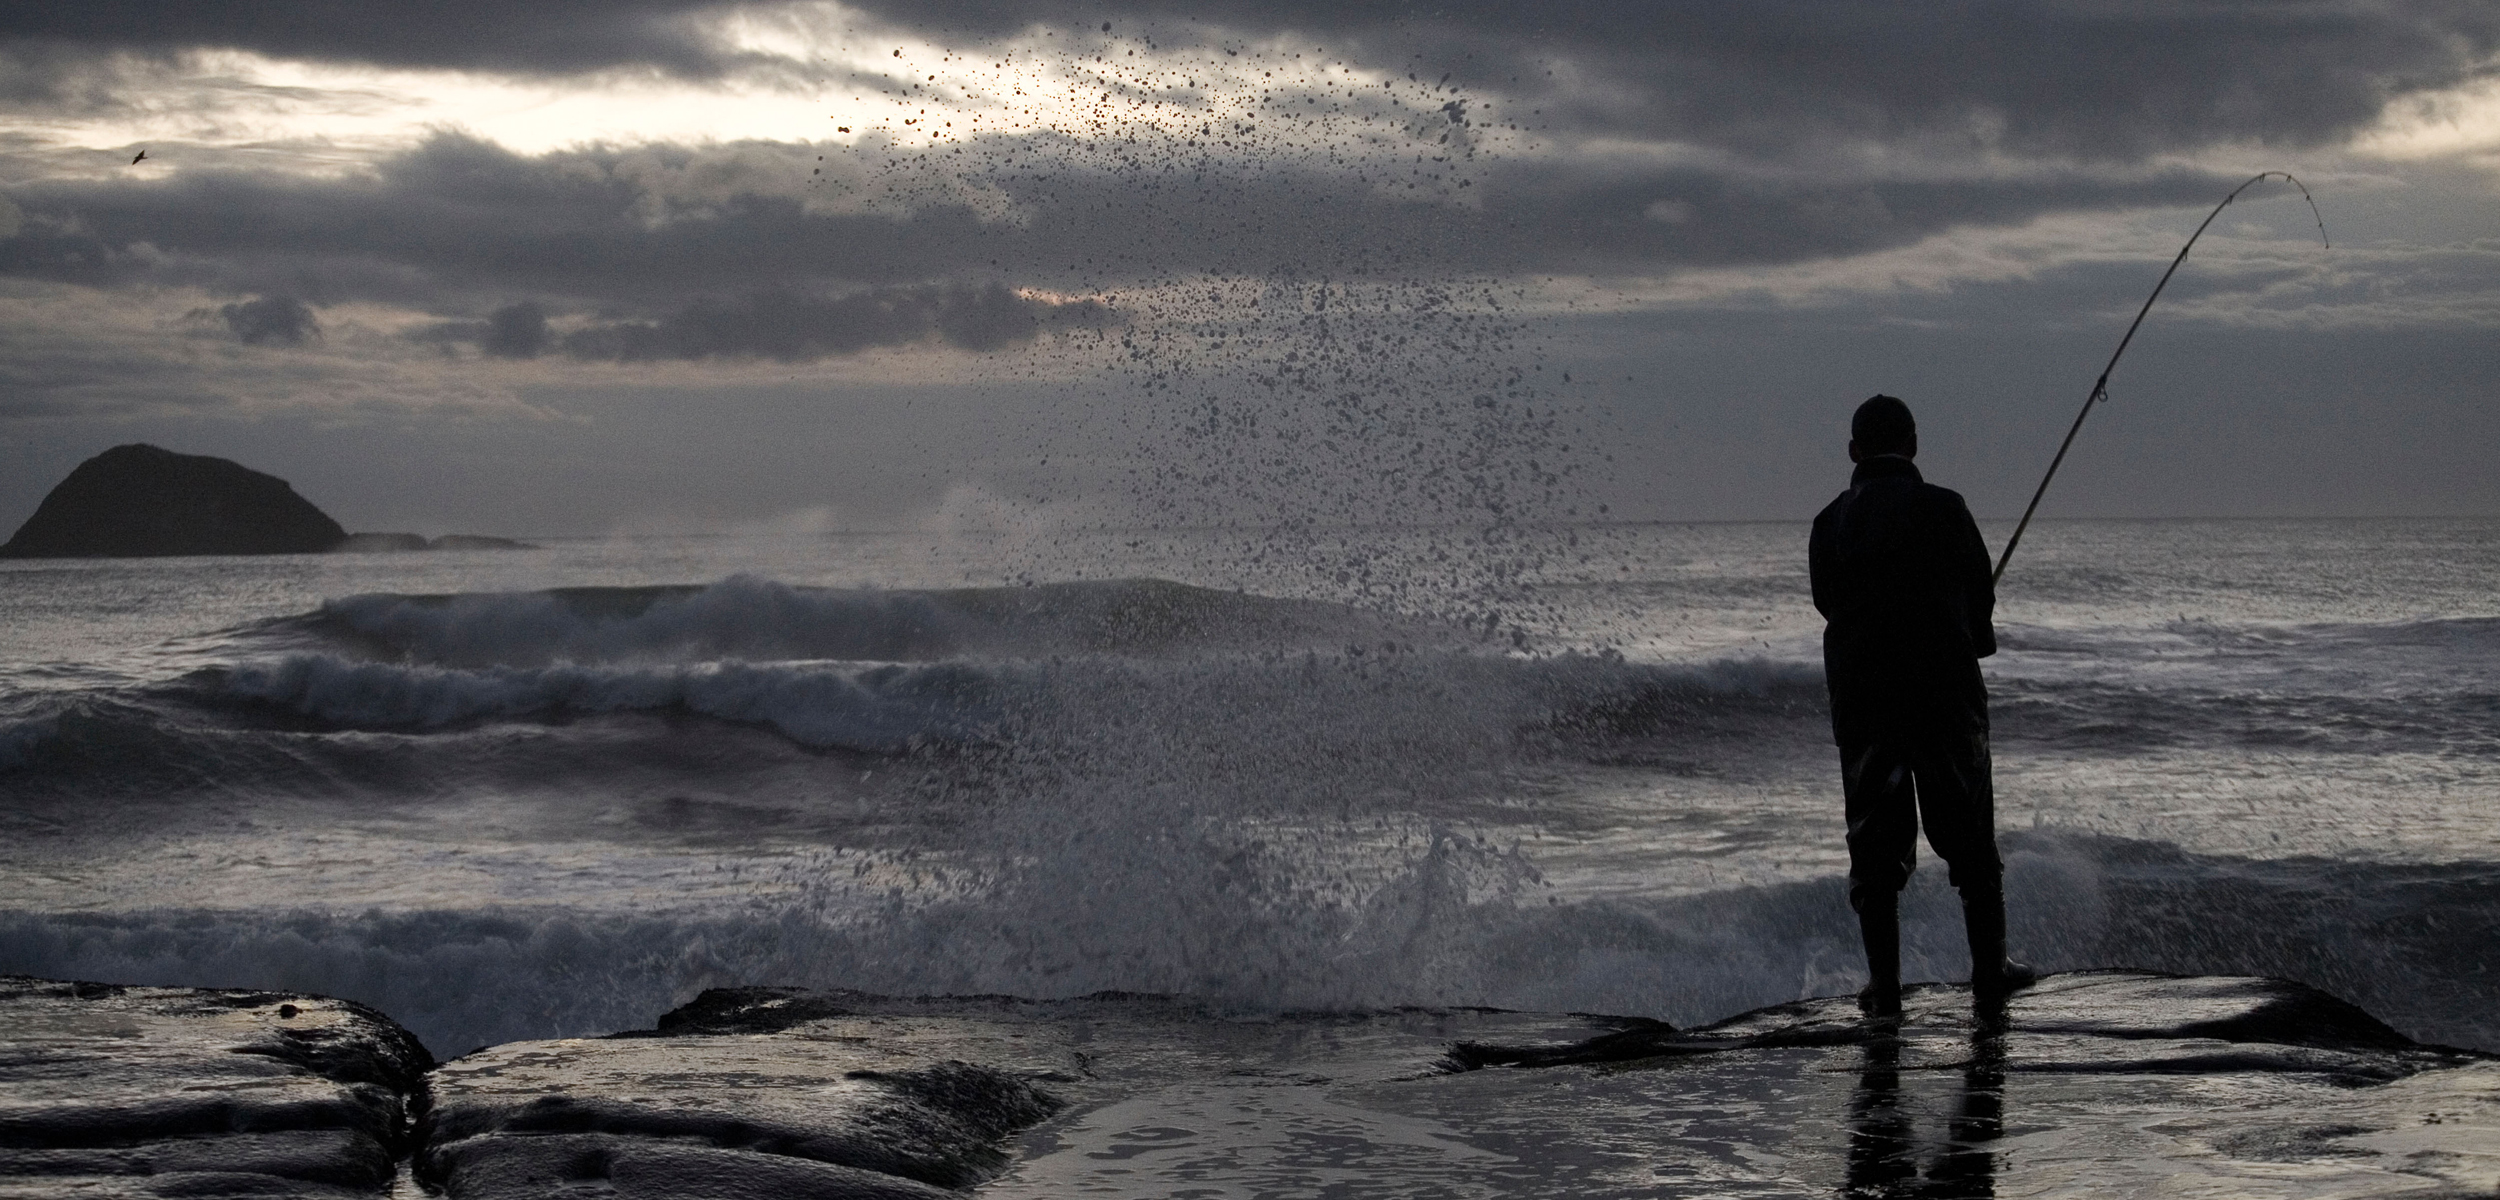 A silhouette of a maori fisherman on the rocks infront of a stormy ocean